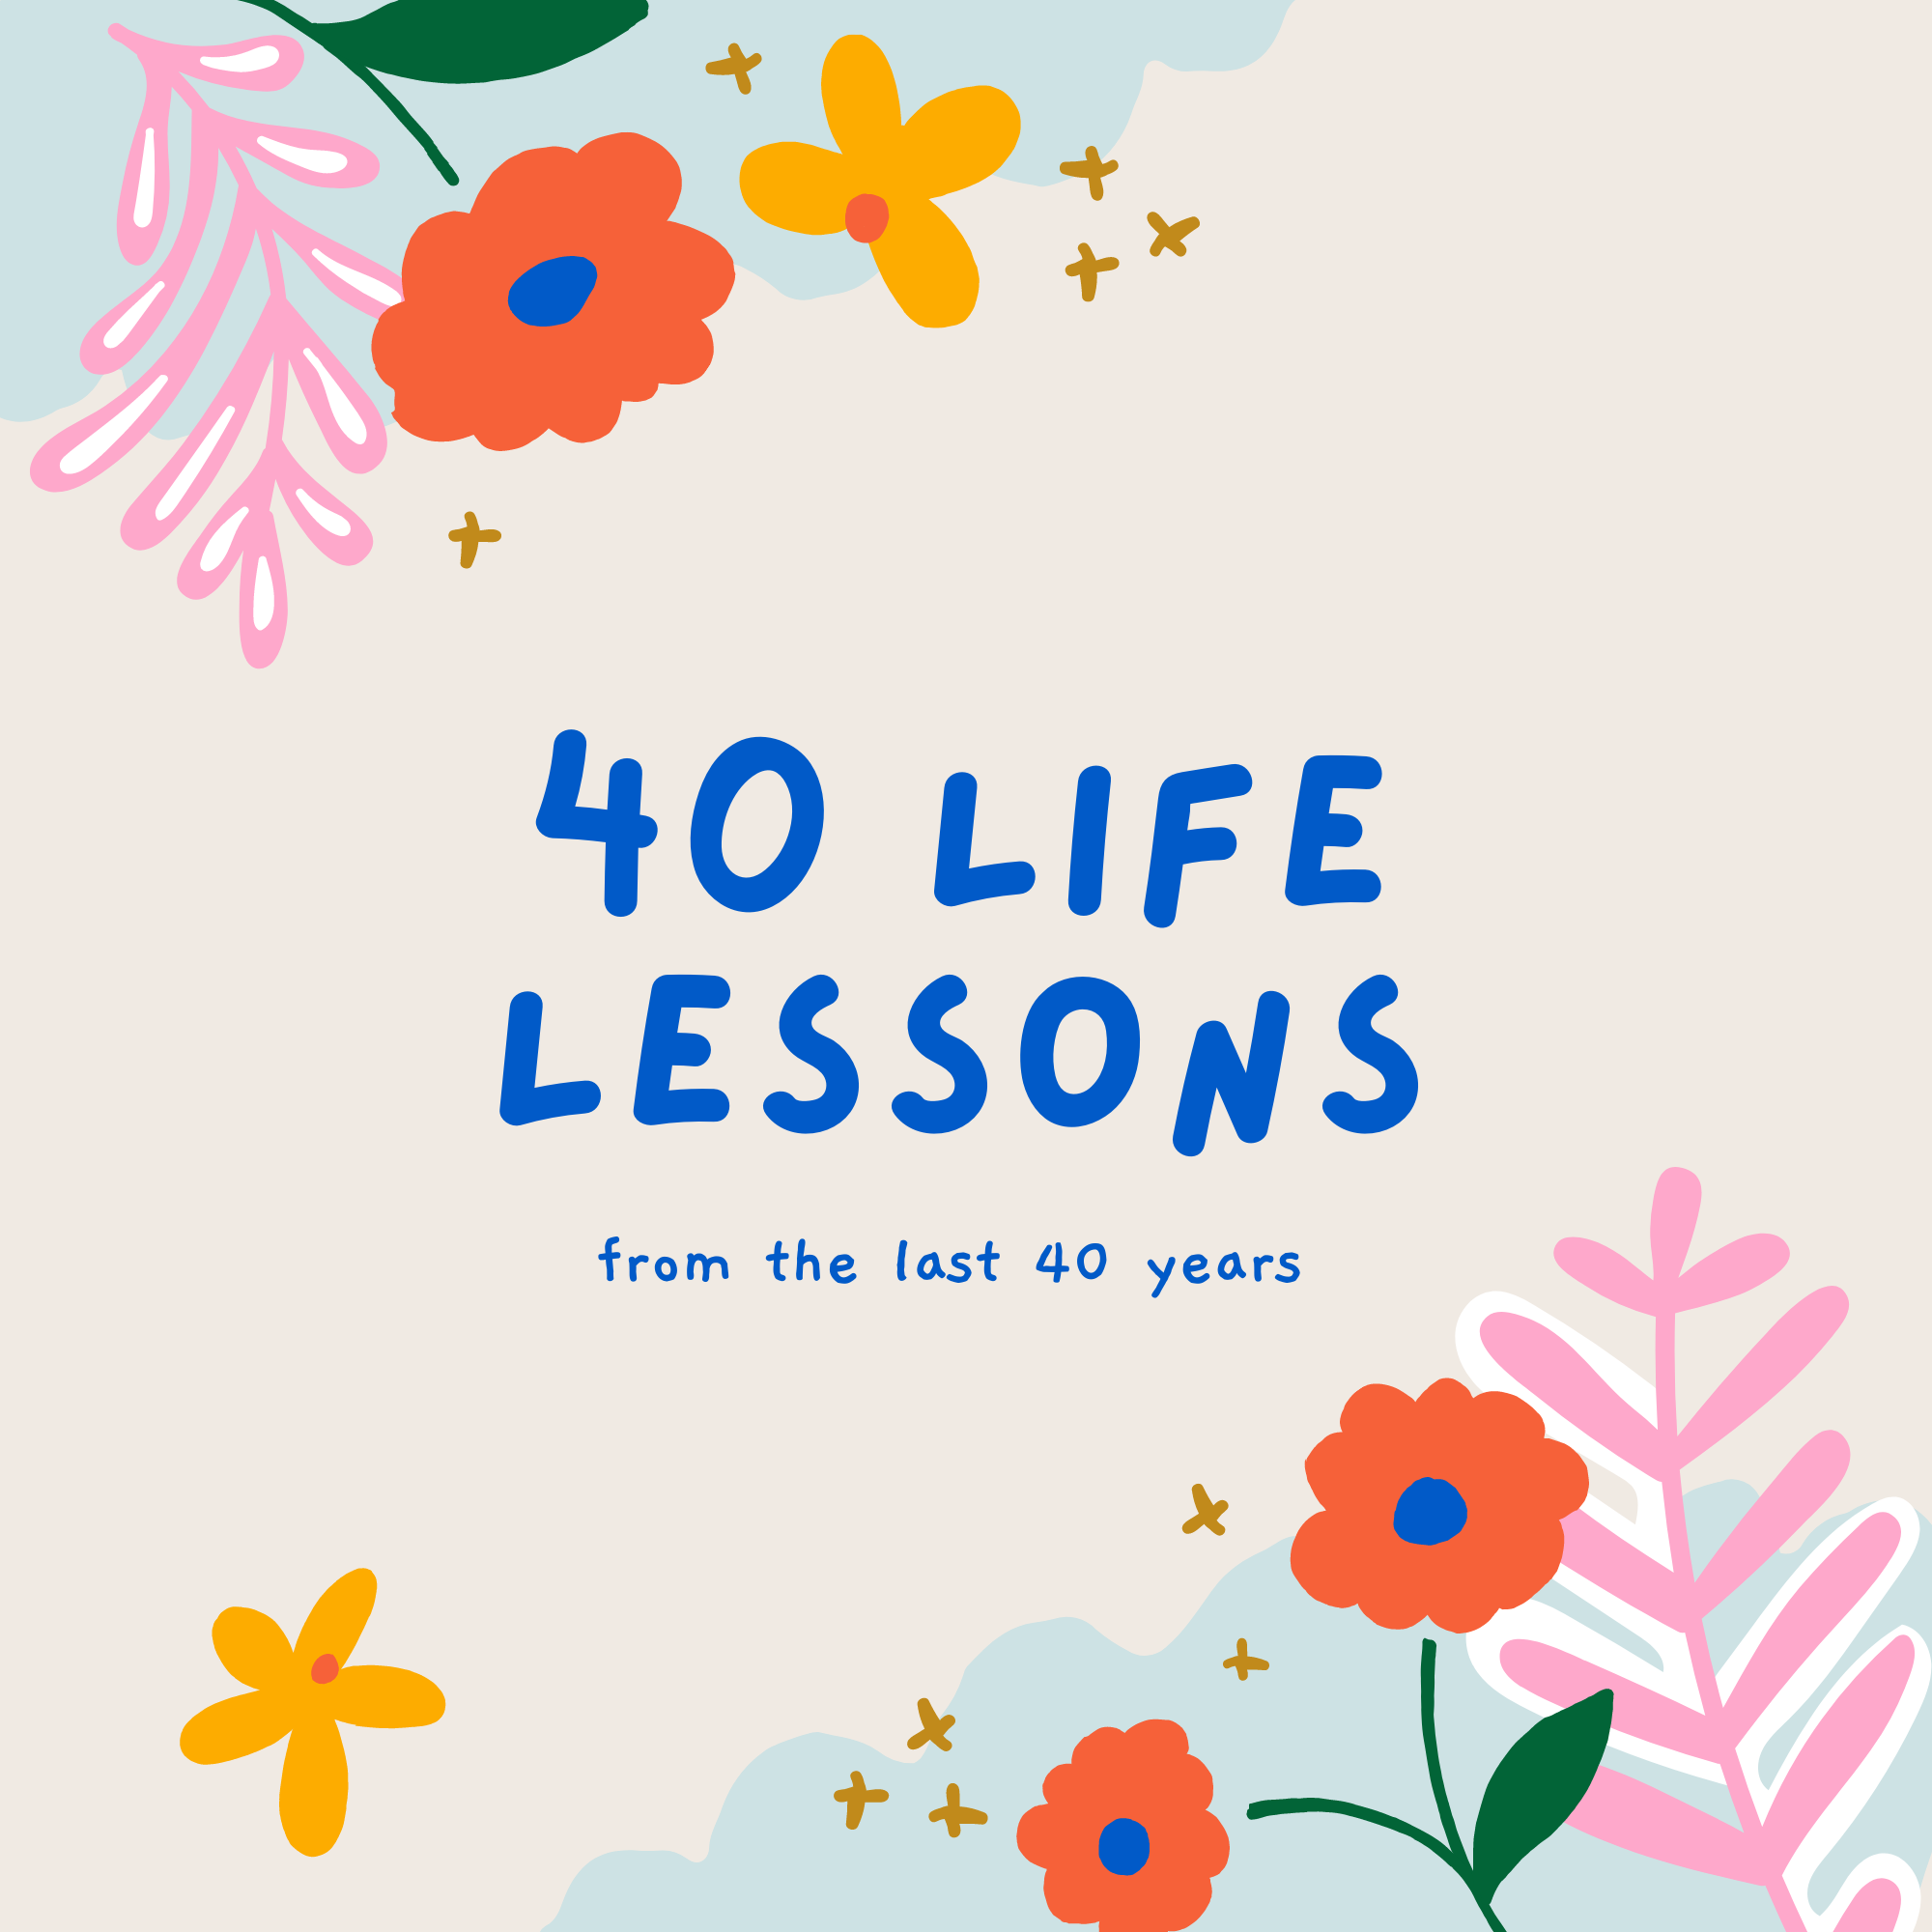 40 Life Lessons